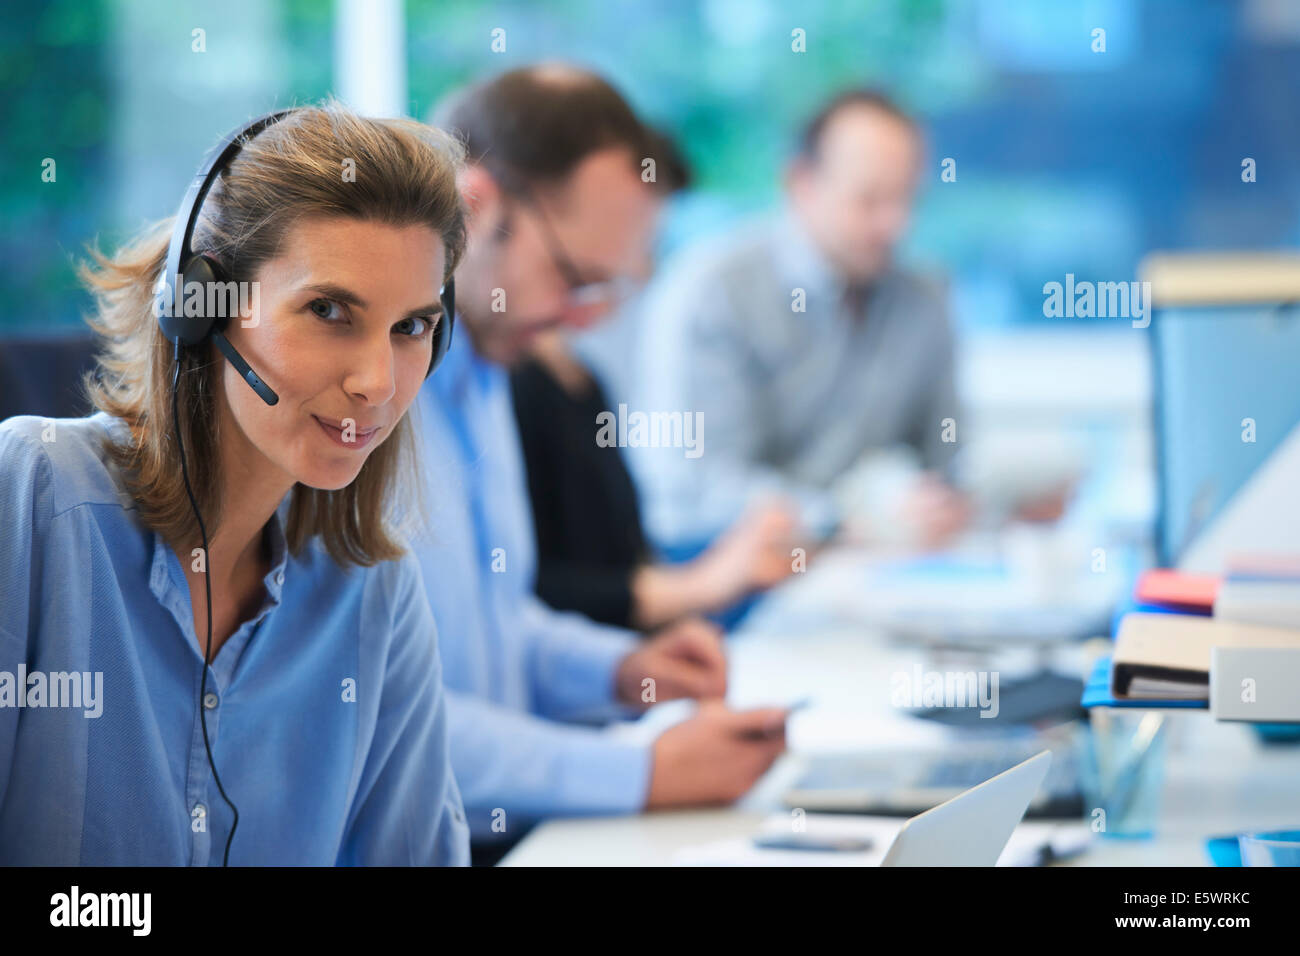 Woman wearing telephone headset in office Stock Photo